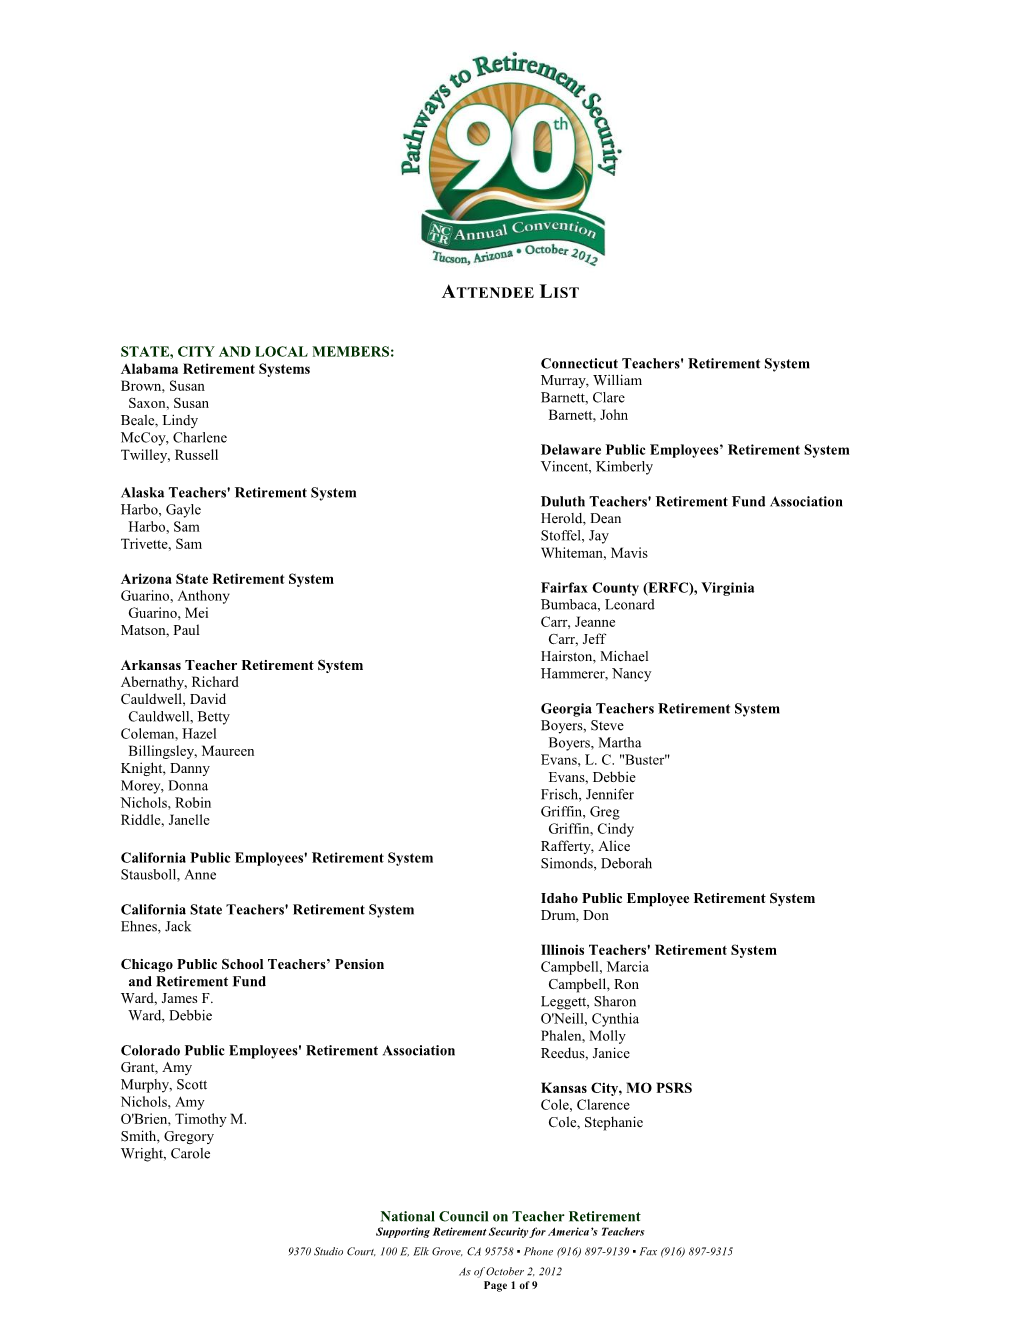 NCTR 90Th Annual Convention Attendee List